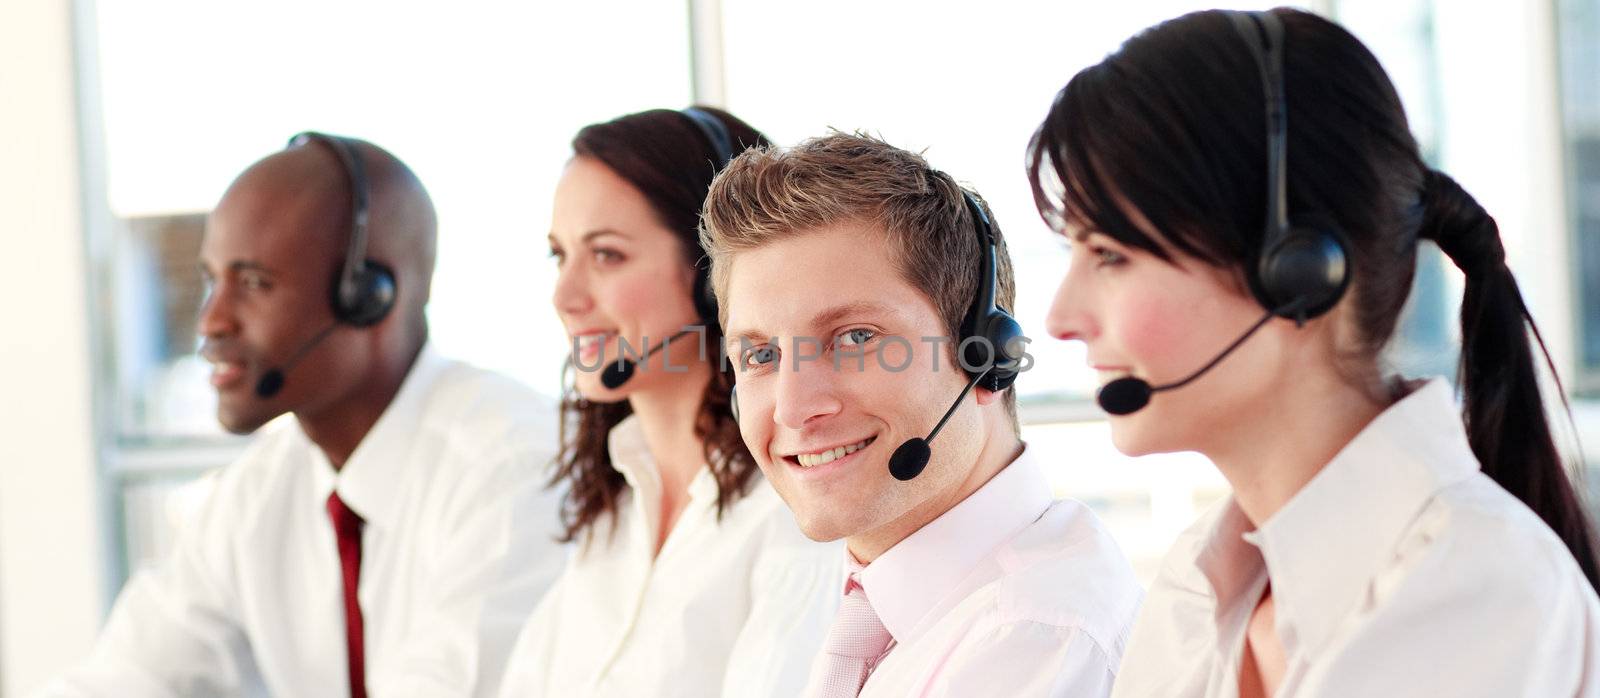 Business called centre with people on headsets  by Wavebreakmedia